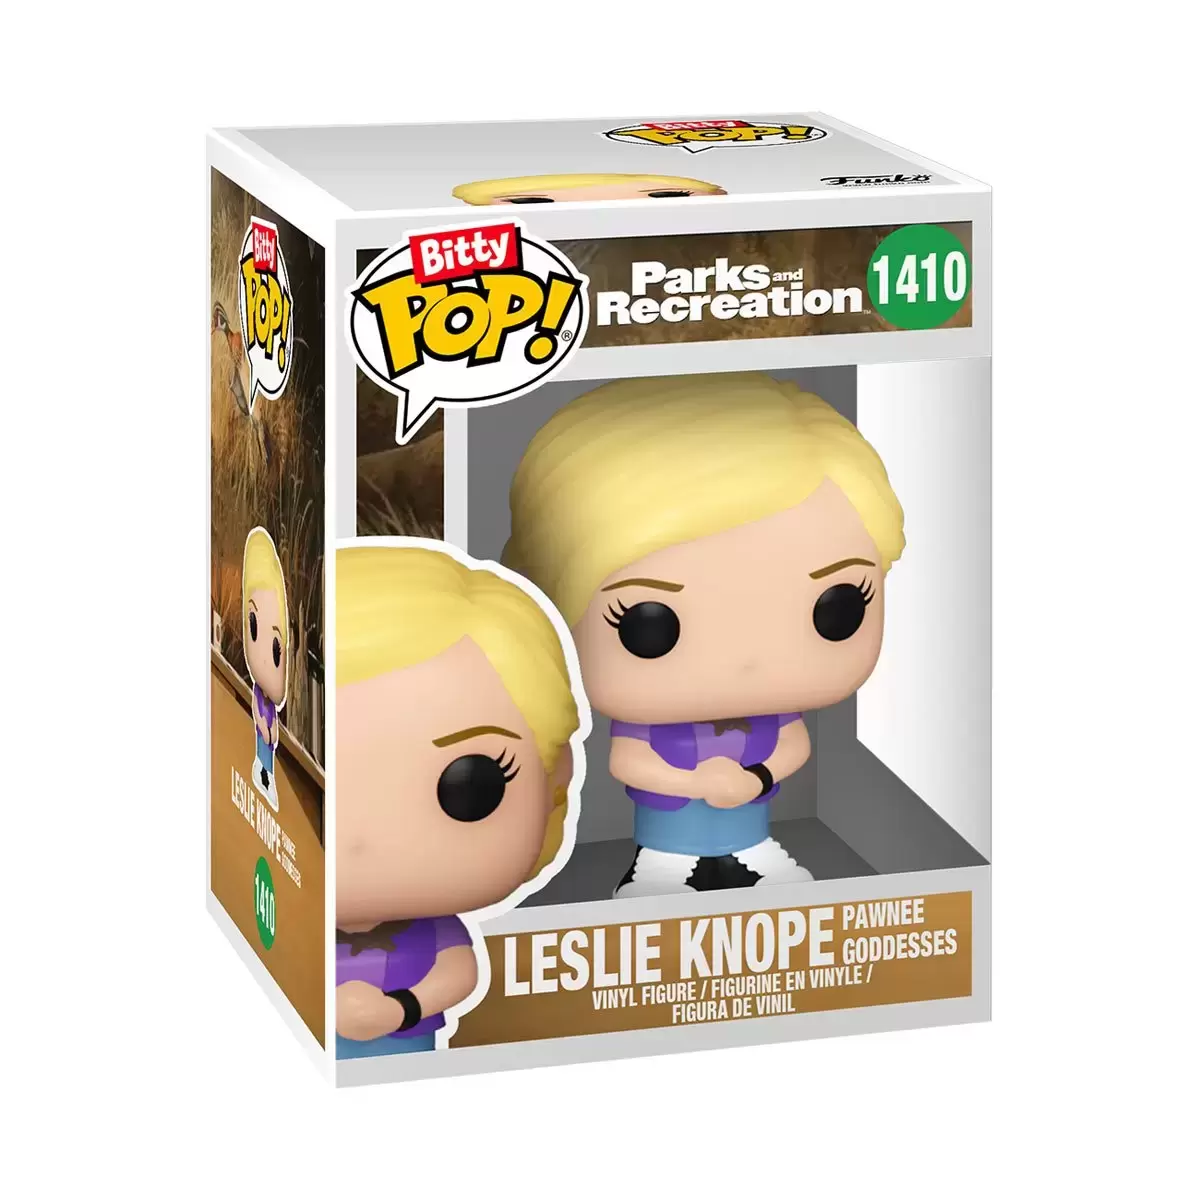 Bitty POP! - Parks And Recreation - Leslie Knope